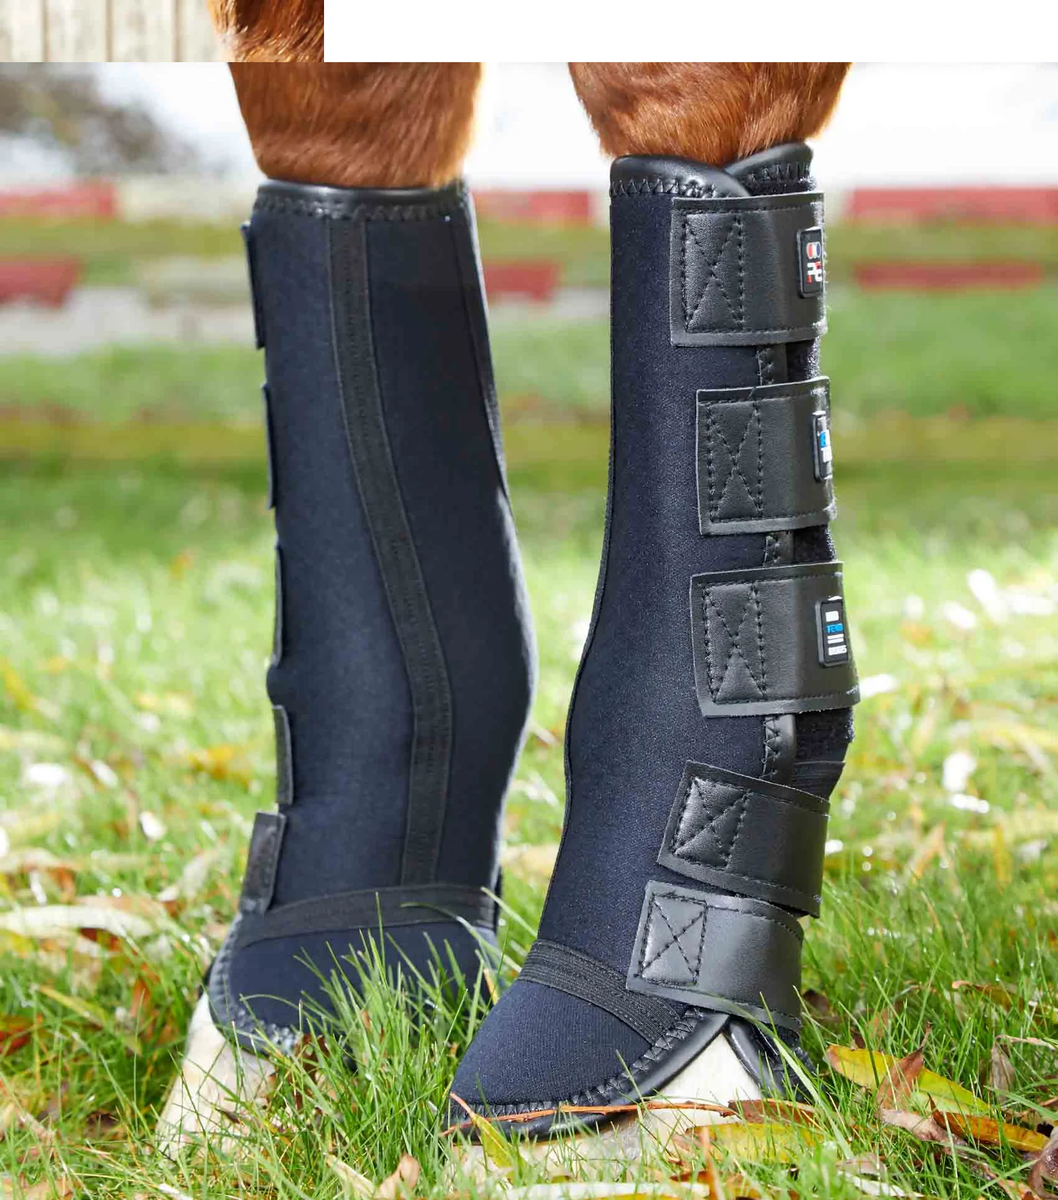 Premier Equine Turnout/ Mud Fever Boots – Summit Grains and Saddlery